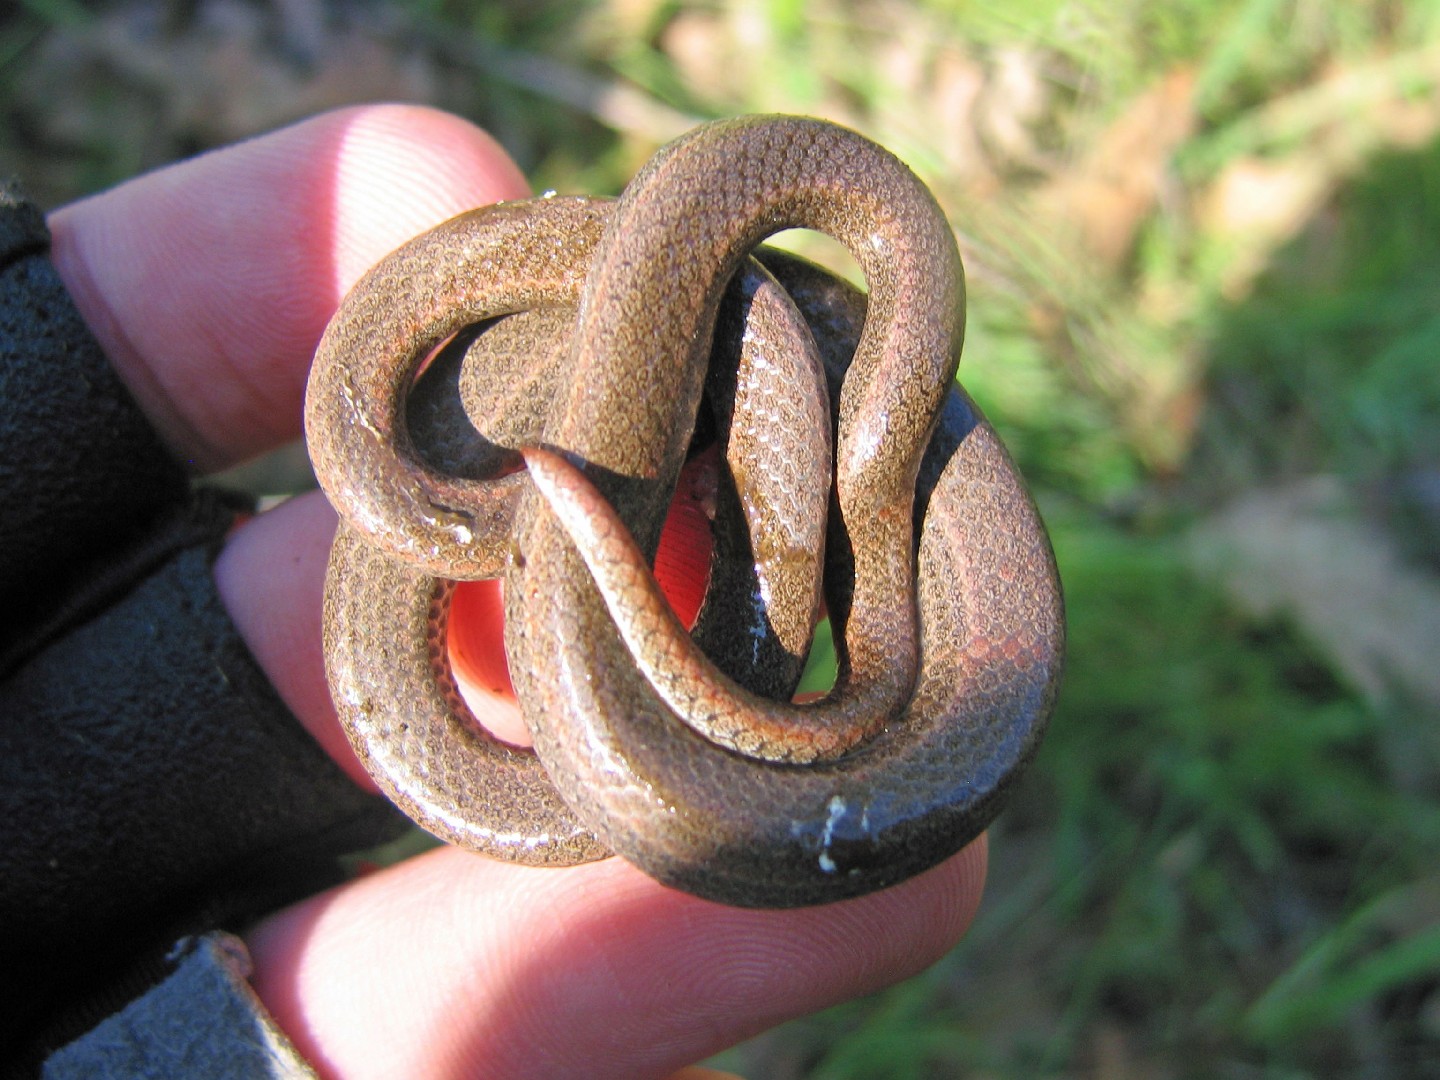 Sharp-tailed snakes (Contia)